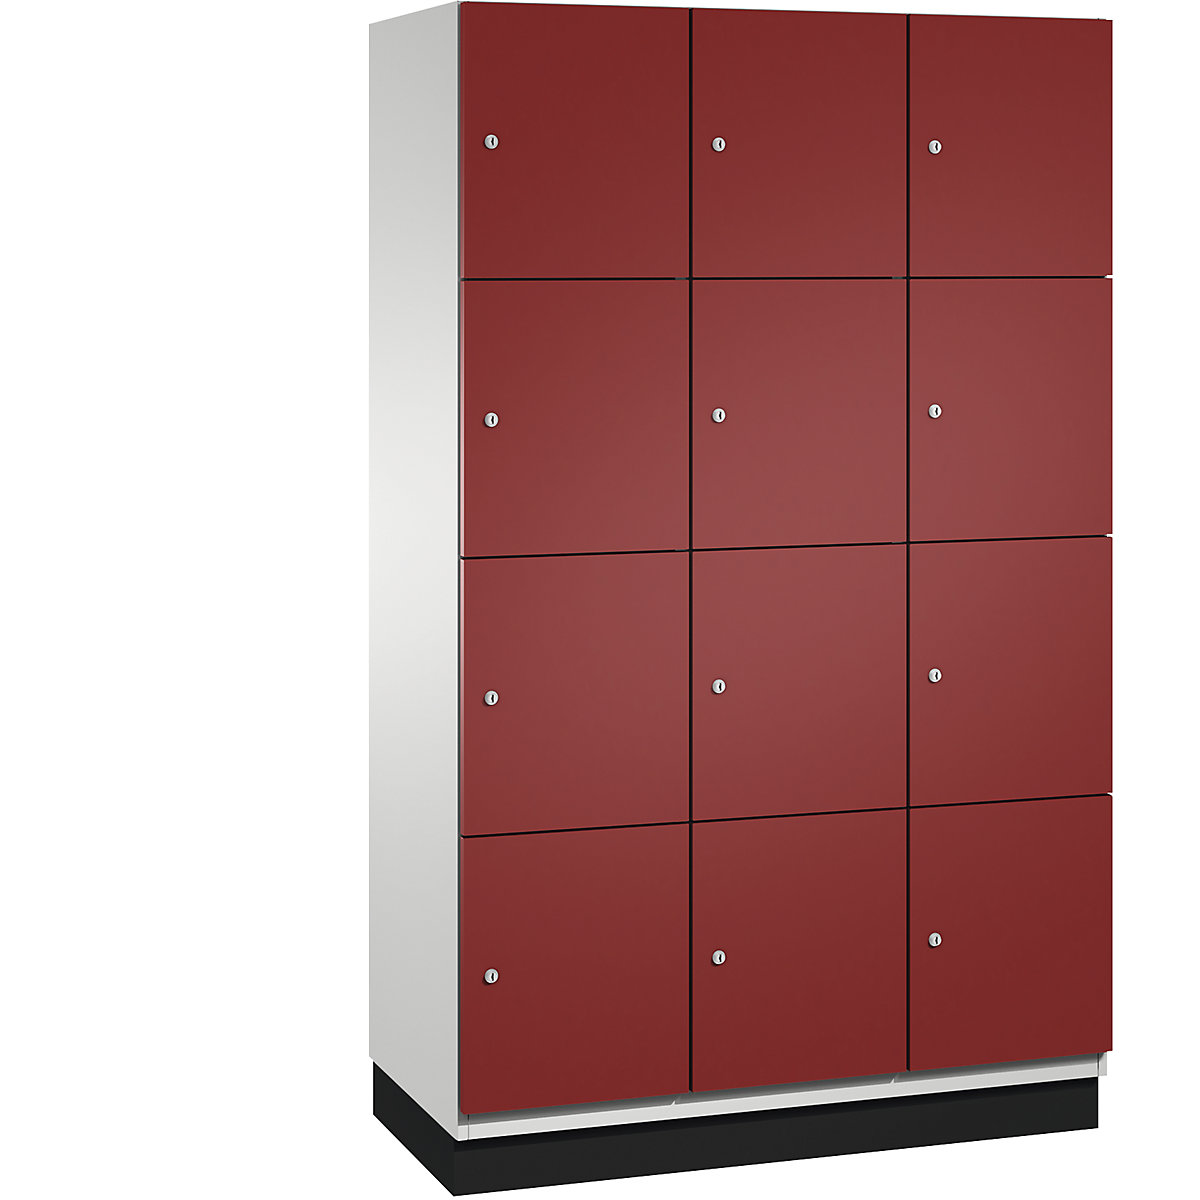 CAMBIO compartment locker with sheet steel doors – C+P, 12 compartments, width 1200 mm, body light grey / door ruby red, compartment height 462.5 mm-18